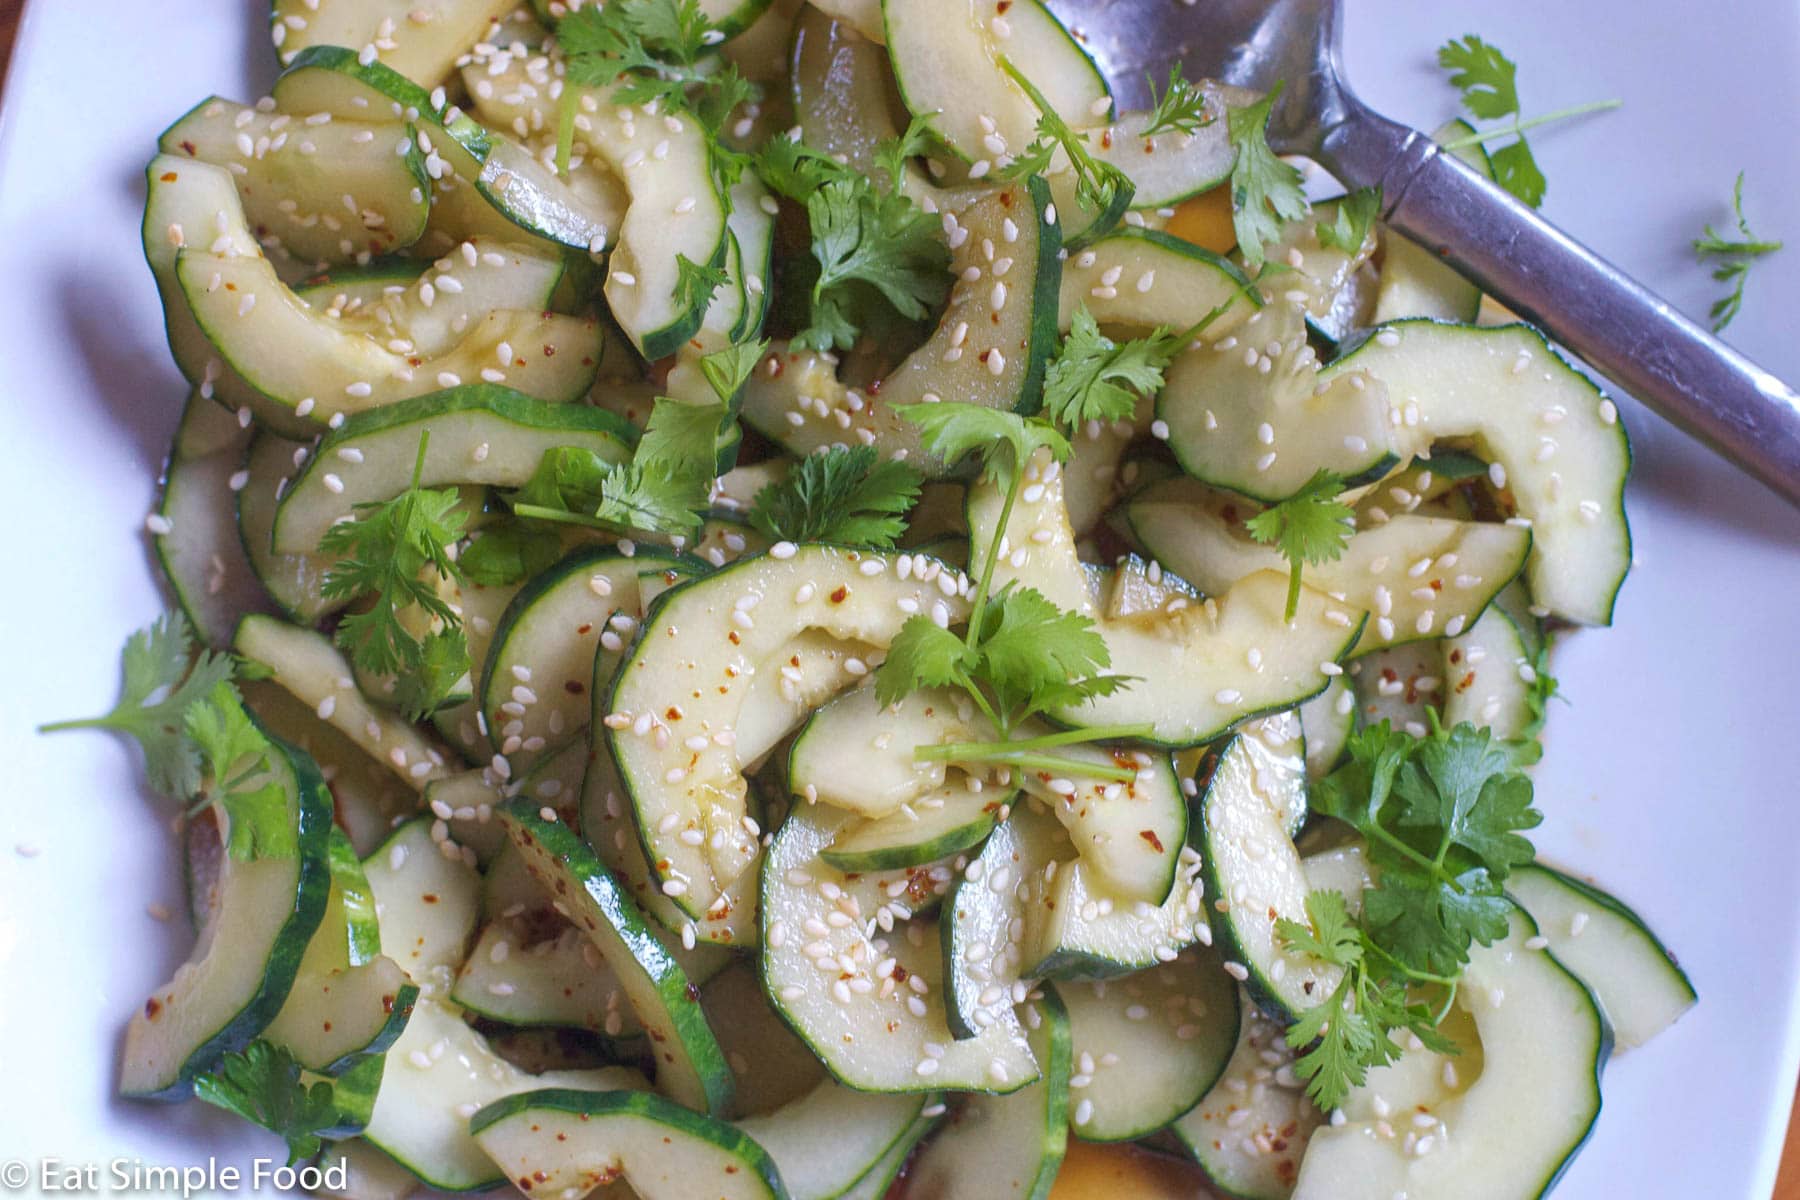 Small white plate of halved cucumbers with seeds taken out tossed in a soy / sesame oil sauce and topped with sesame seeds and cilantro.